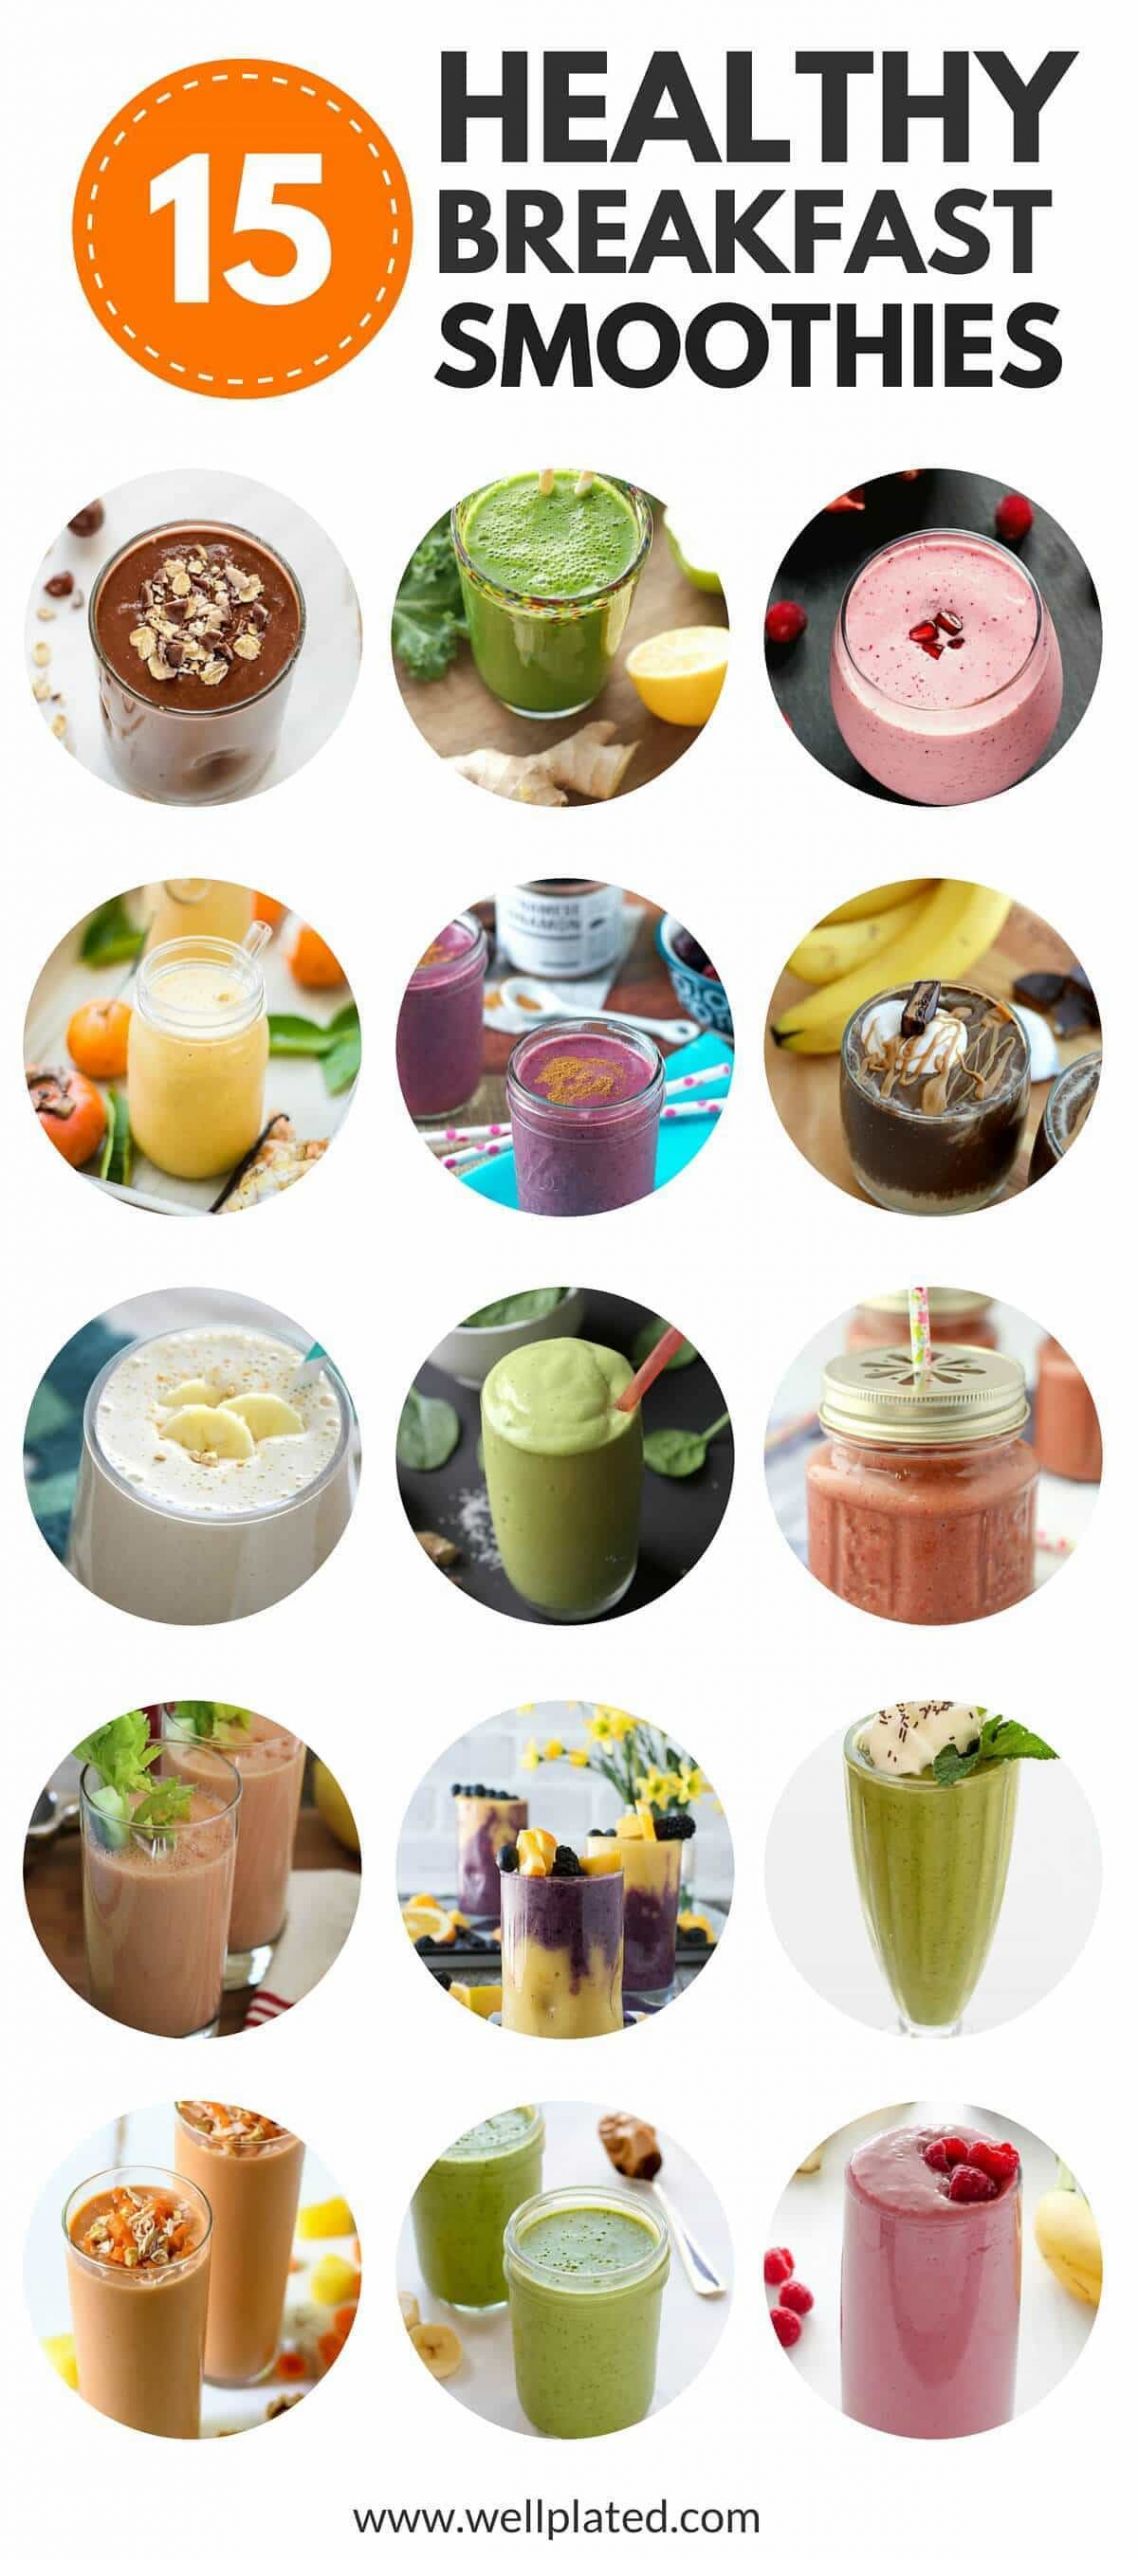 Simple Healthy Smoothie Recipes
 The Best 15 Healthy Breakfast Smoothies